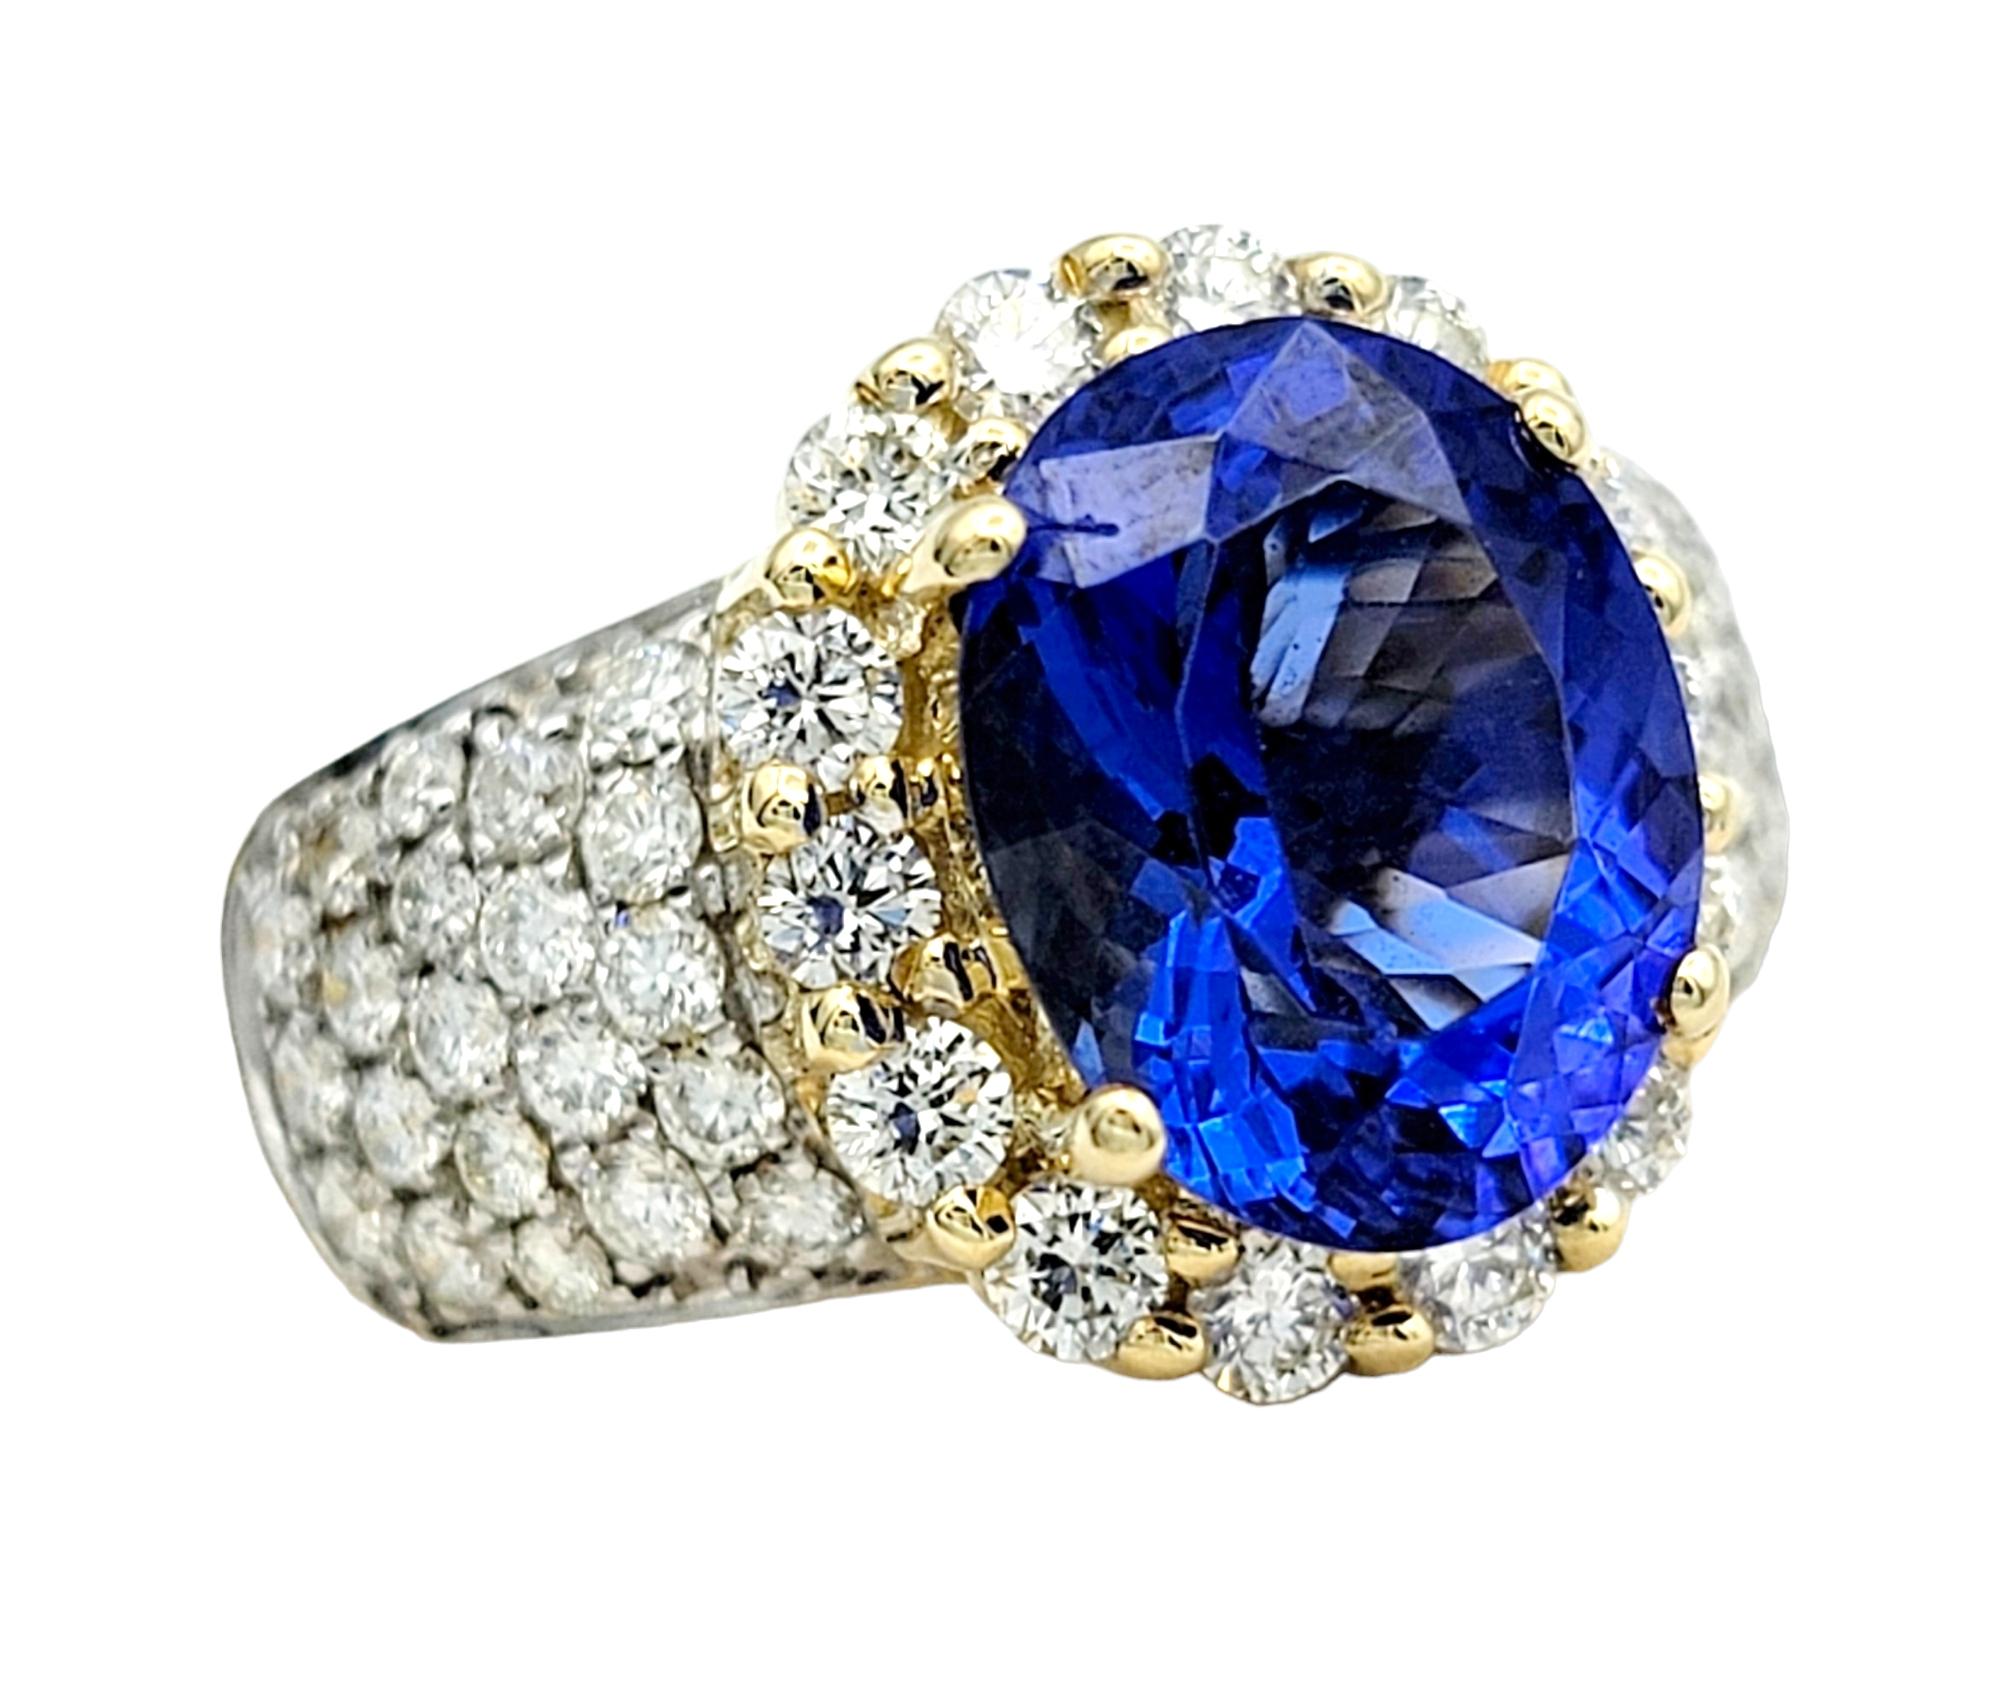 Oval Cut 4.98 Carat Total Oval Tanzanite and Diamond Halo Cocktail Ring in 14 Karat Gold For Sale